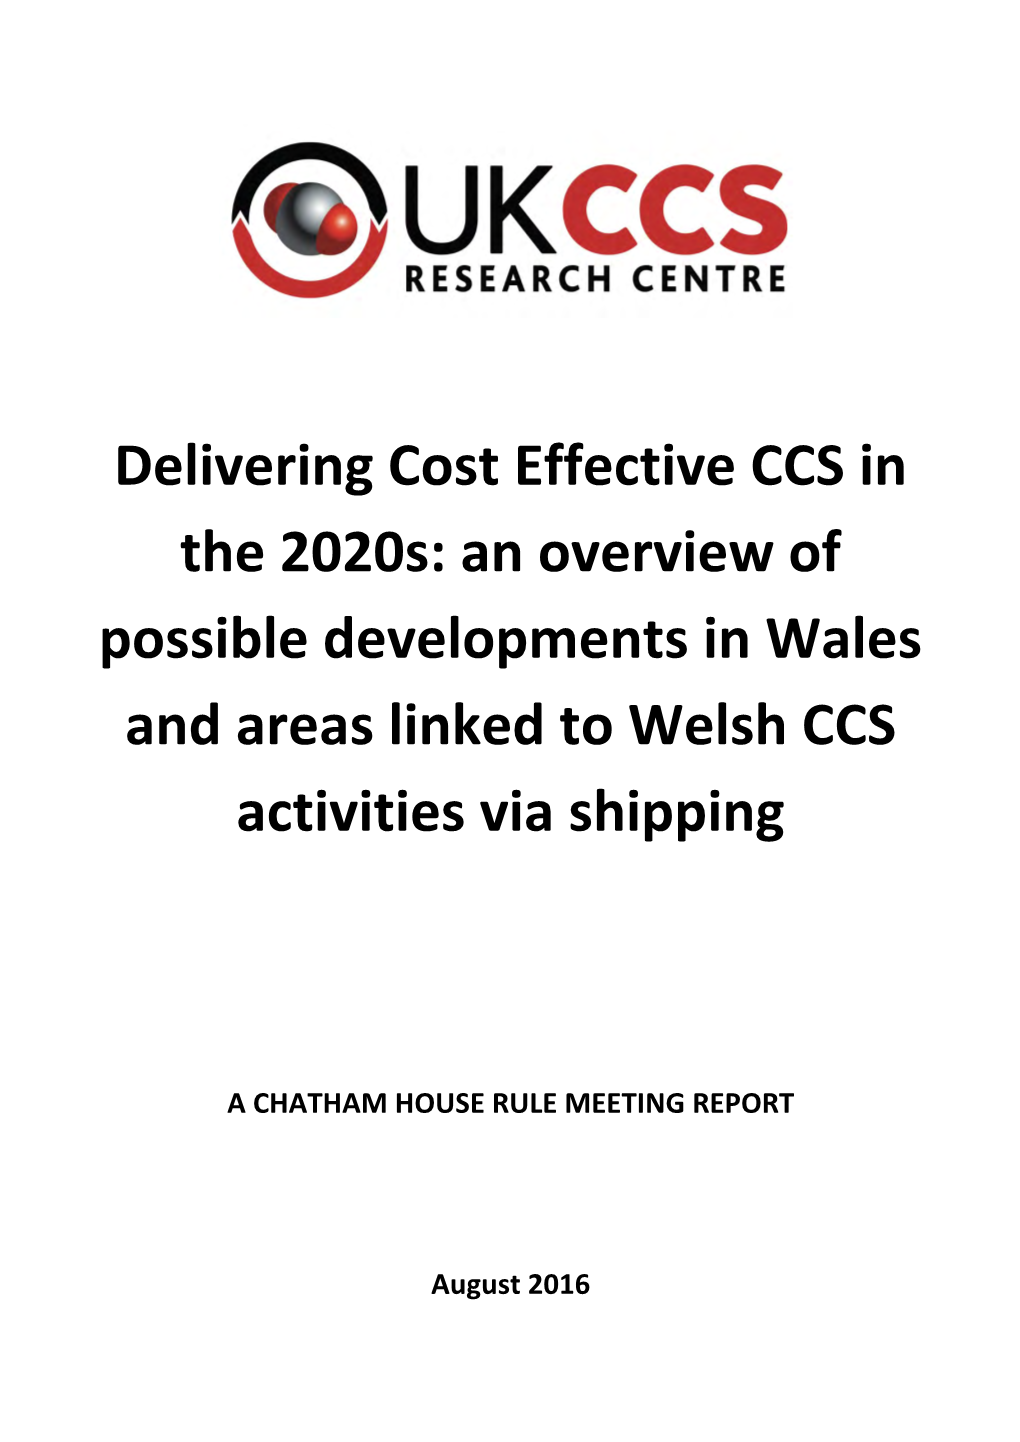 Delivering Cost Effective CCS in the 2020S: an Overview of Possible Developments in Wales and Areas Linked to Welsh CCS Activities Via Shipping